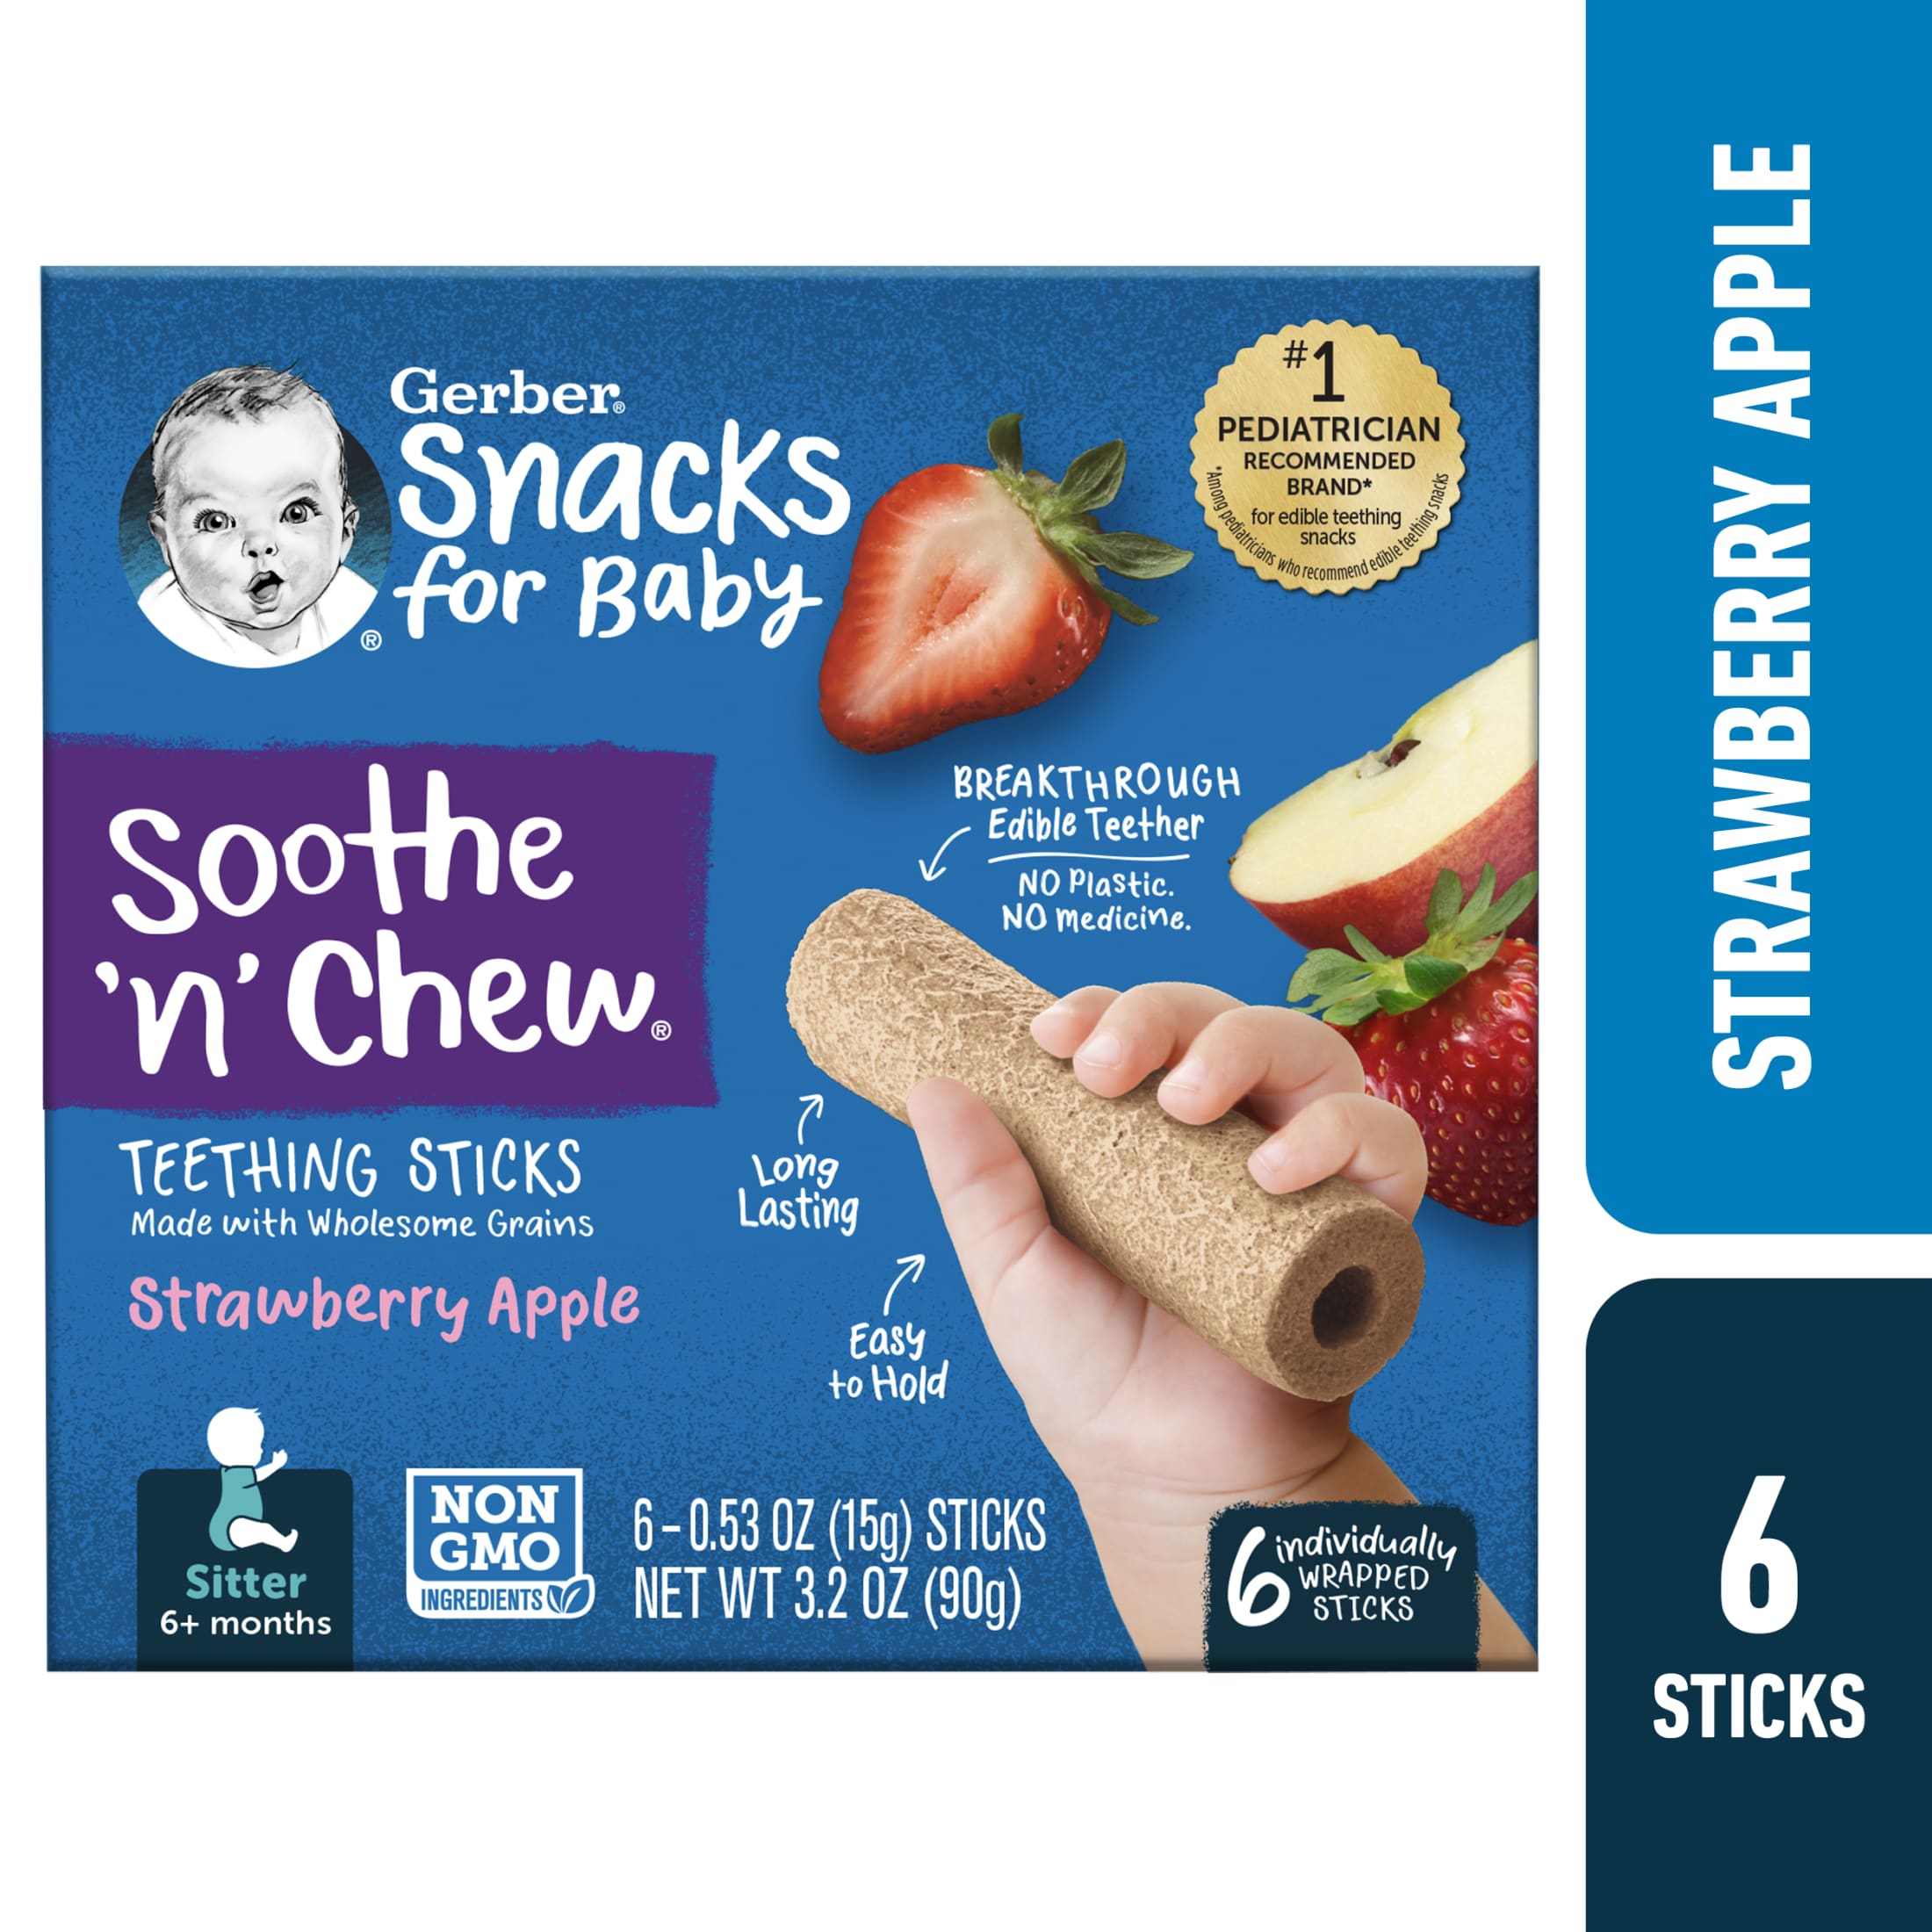 Gerber Snacks for Baby Strawberry Apple Teething Sticks, 3.2 oz Boxes (6 Pack) - image 1 of 6